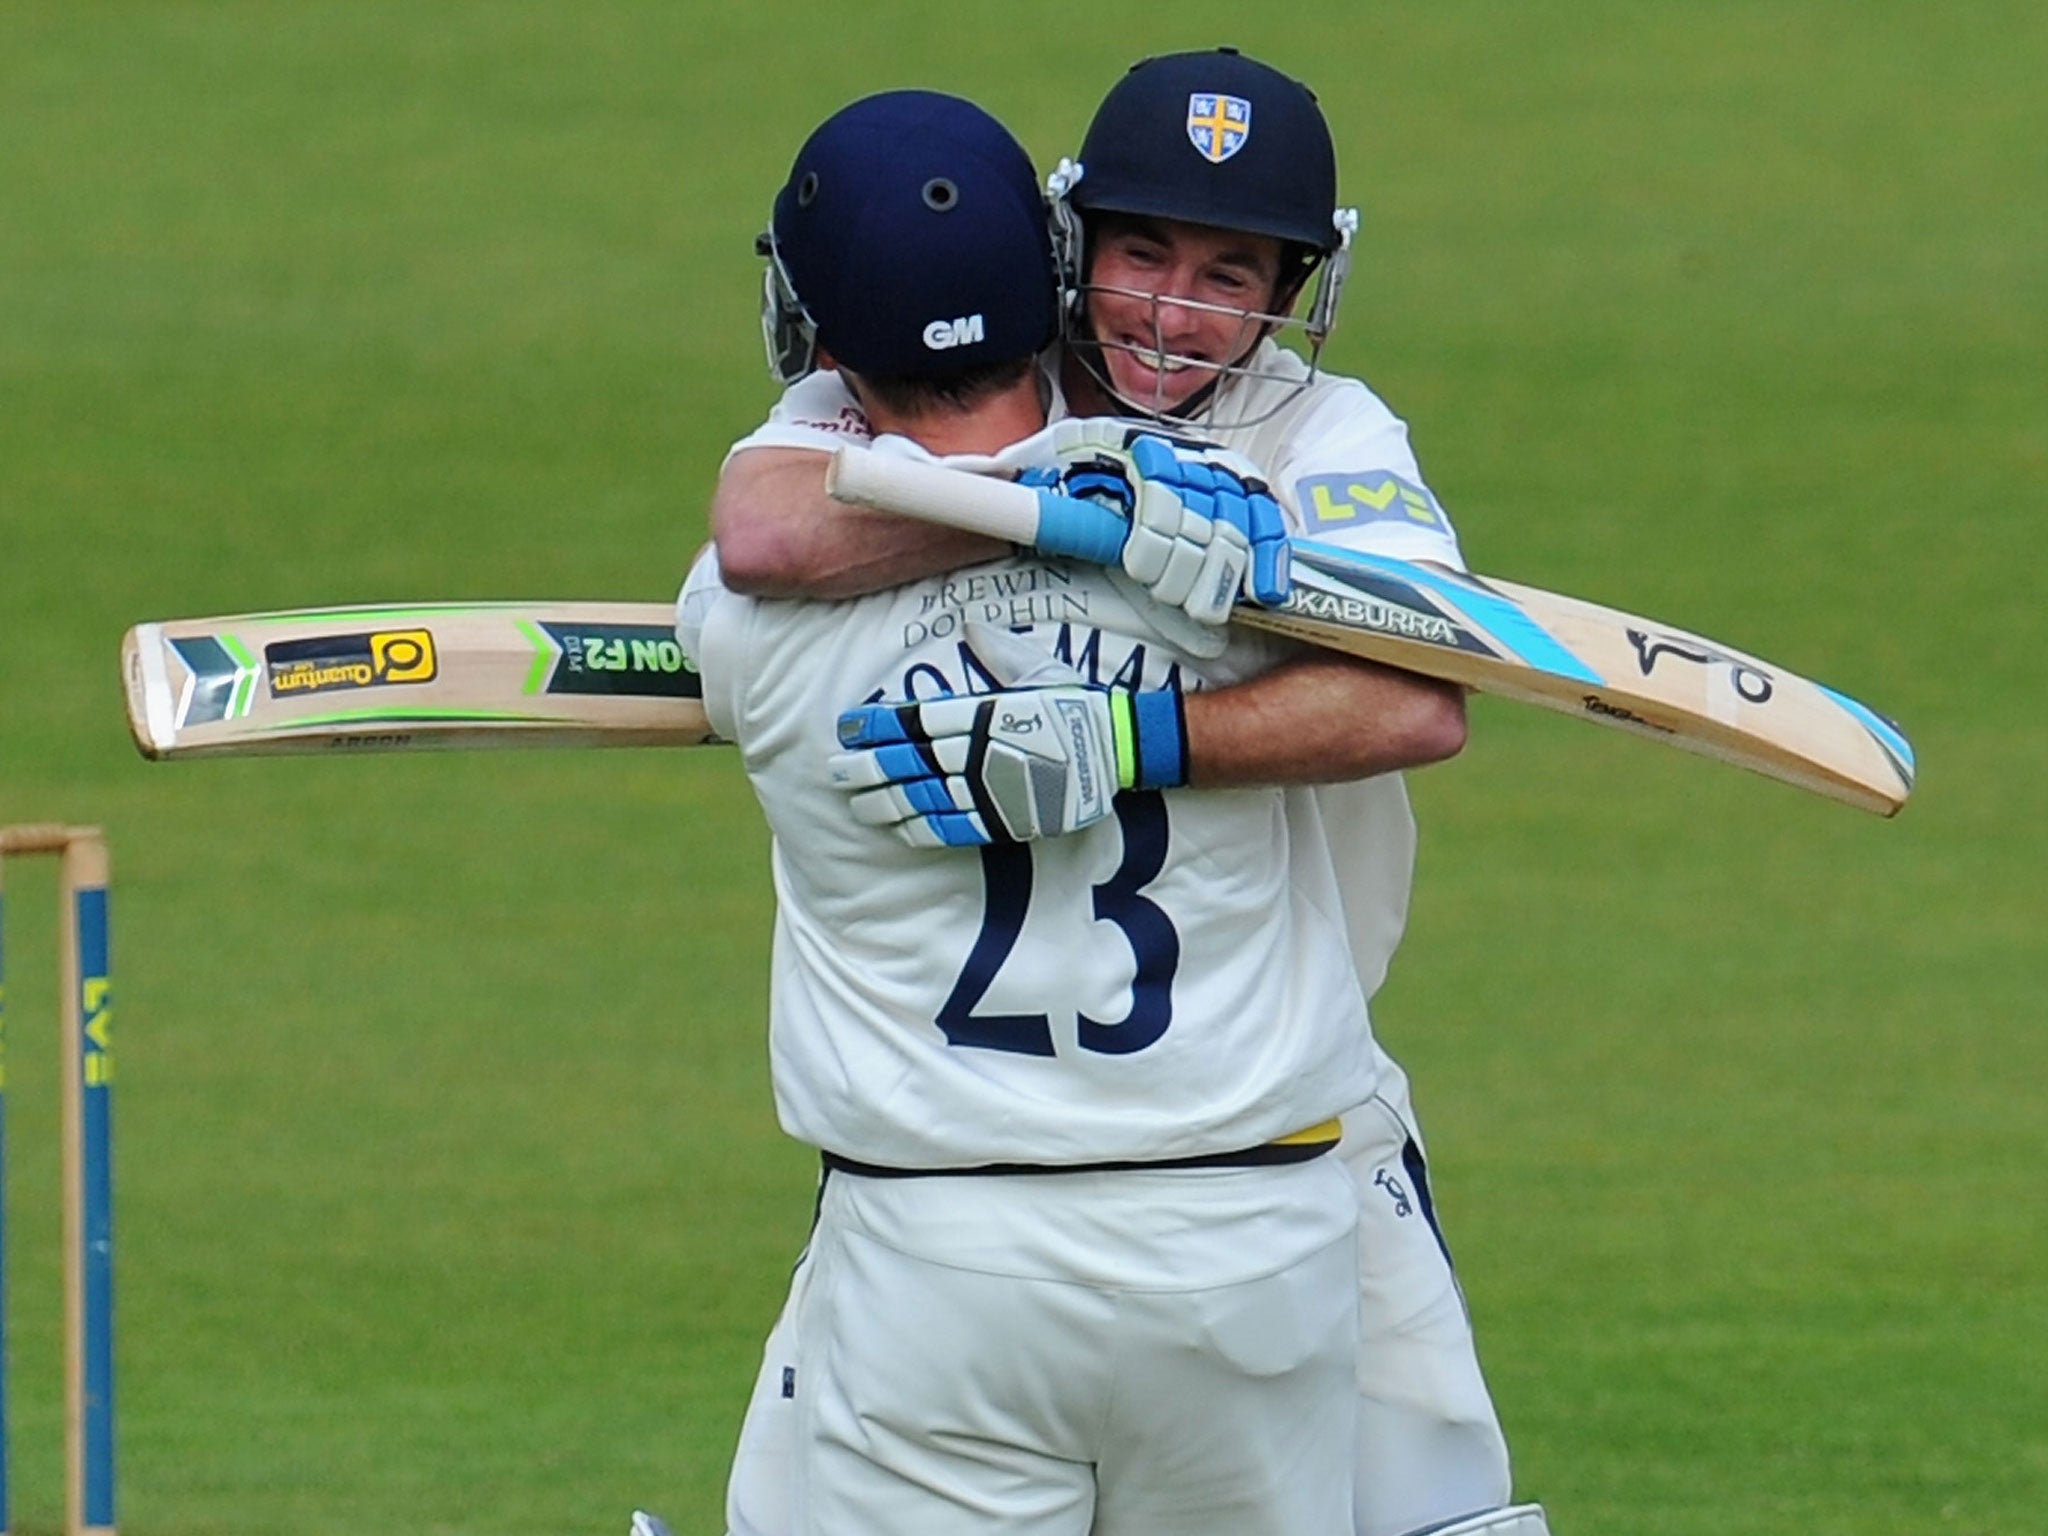 Durham batsmen Will Smith (right) and Mark Stoneman celebrate after winning the County Championship